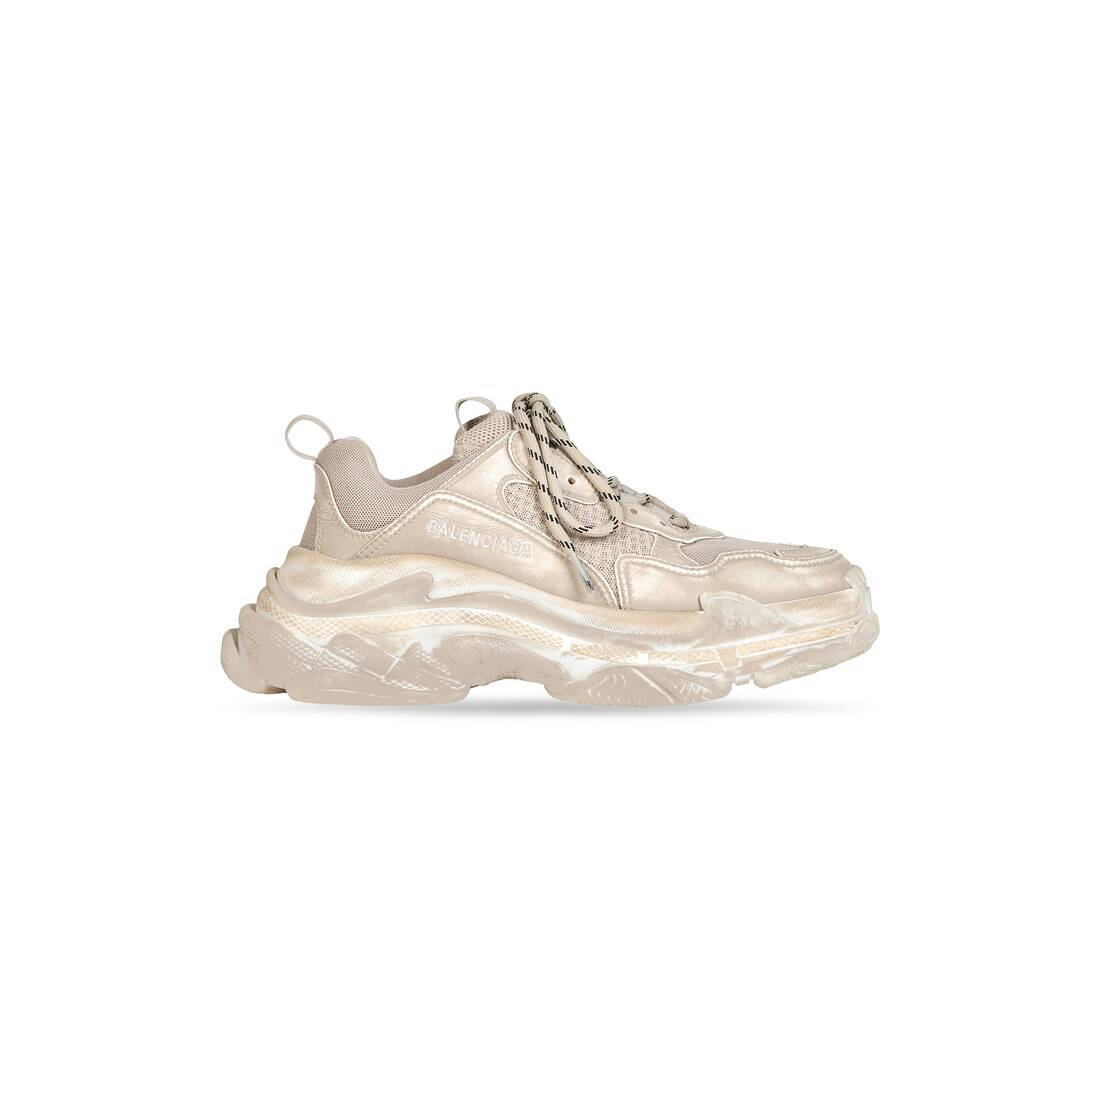 Display zoomed version of triple s faded trainers 1